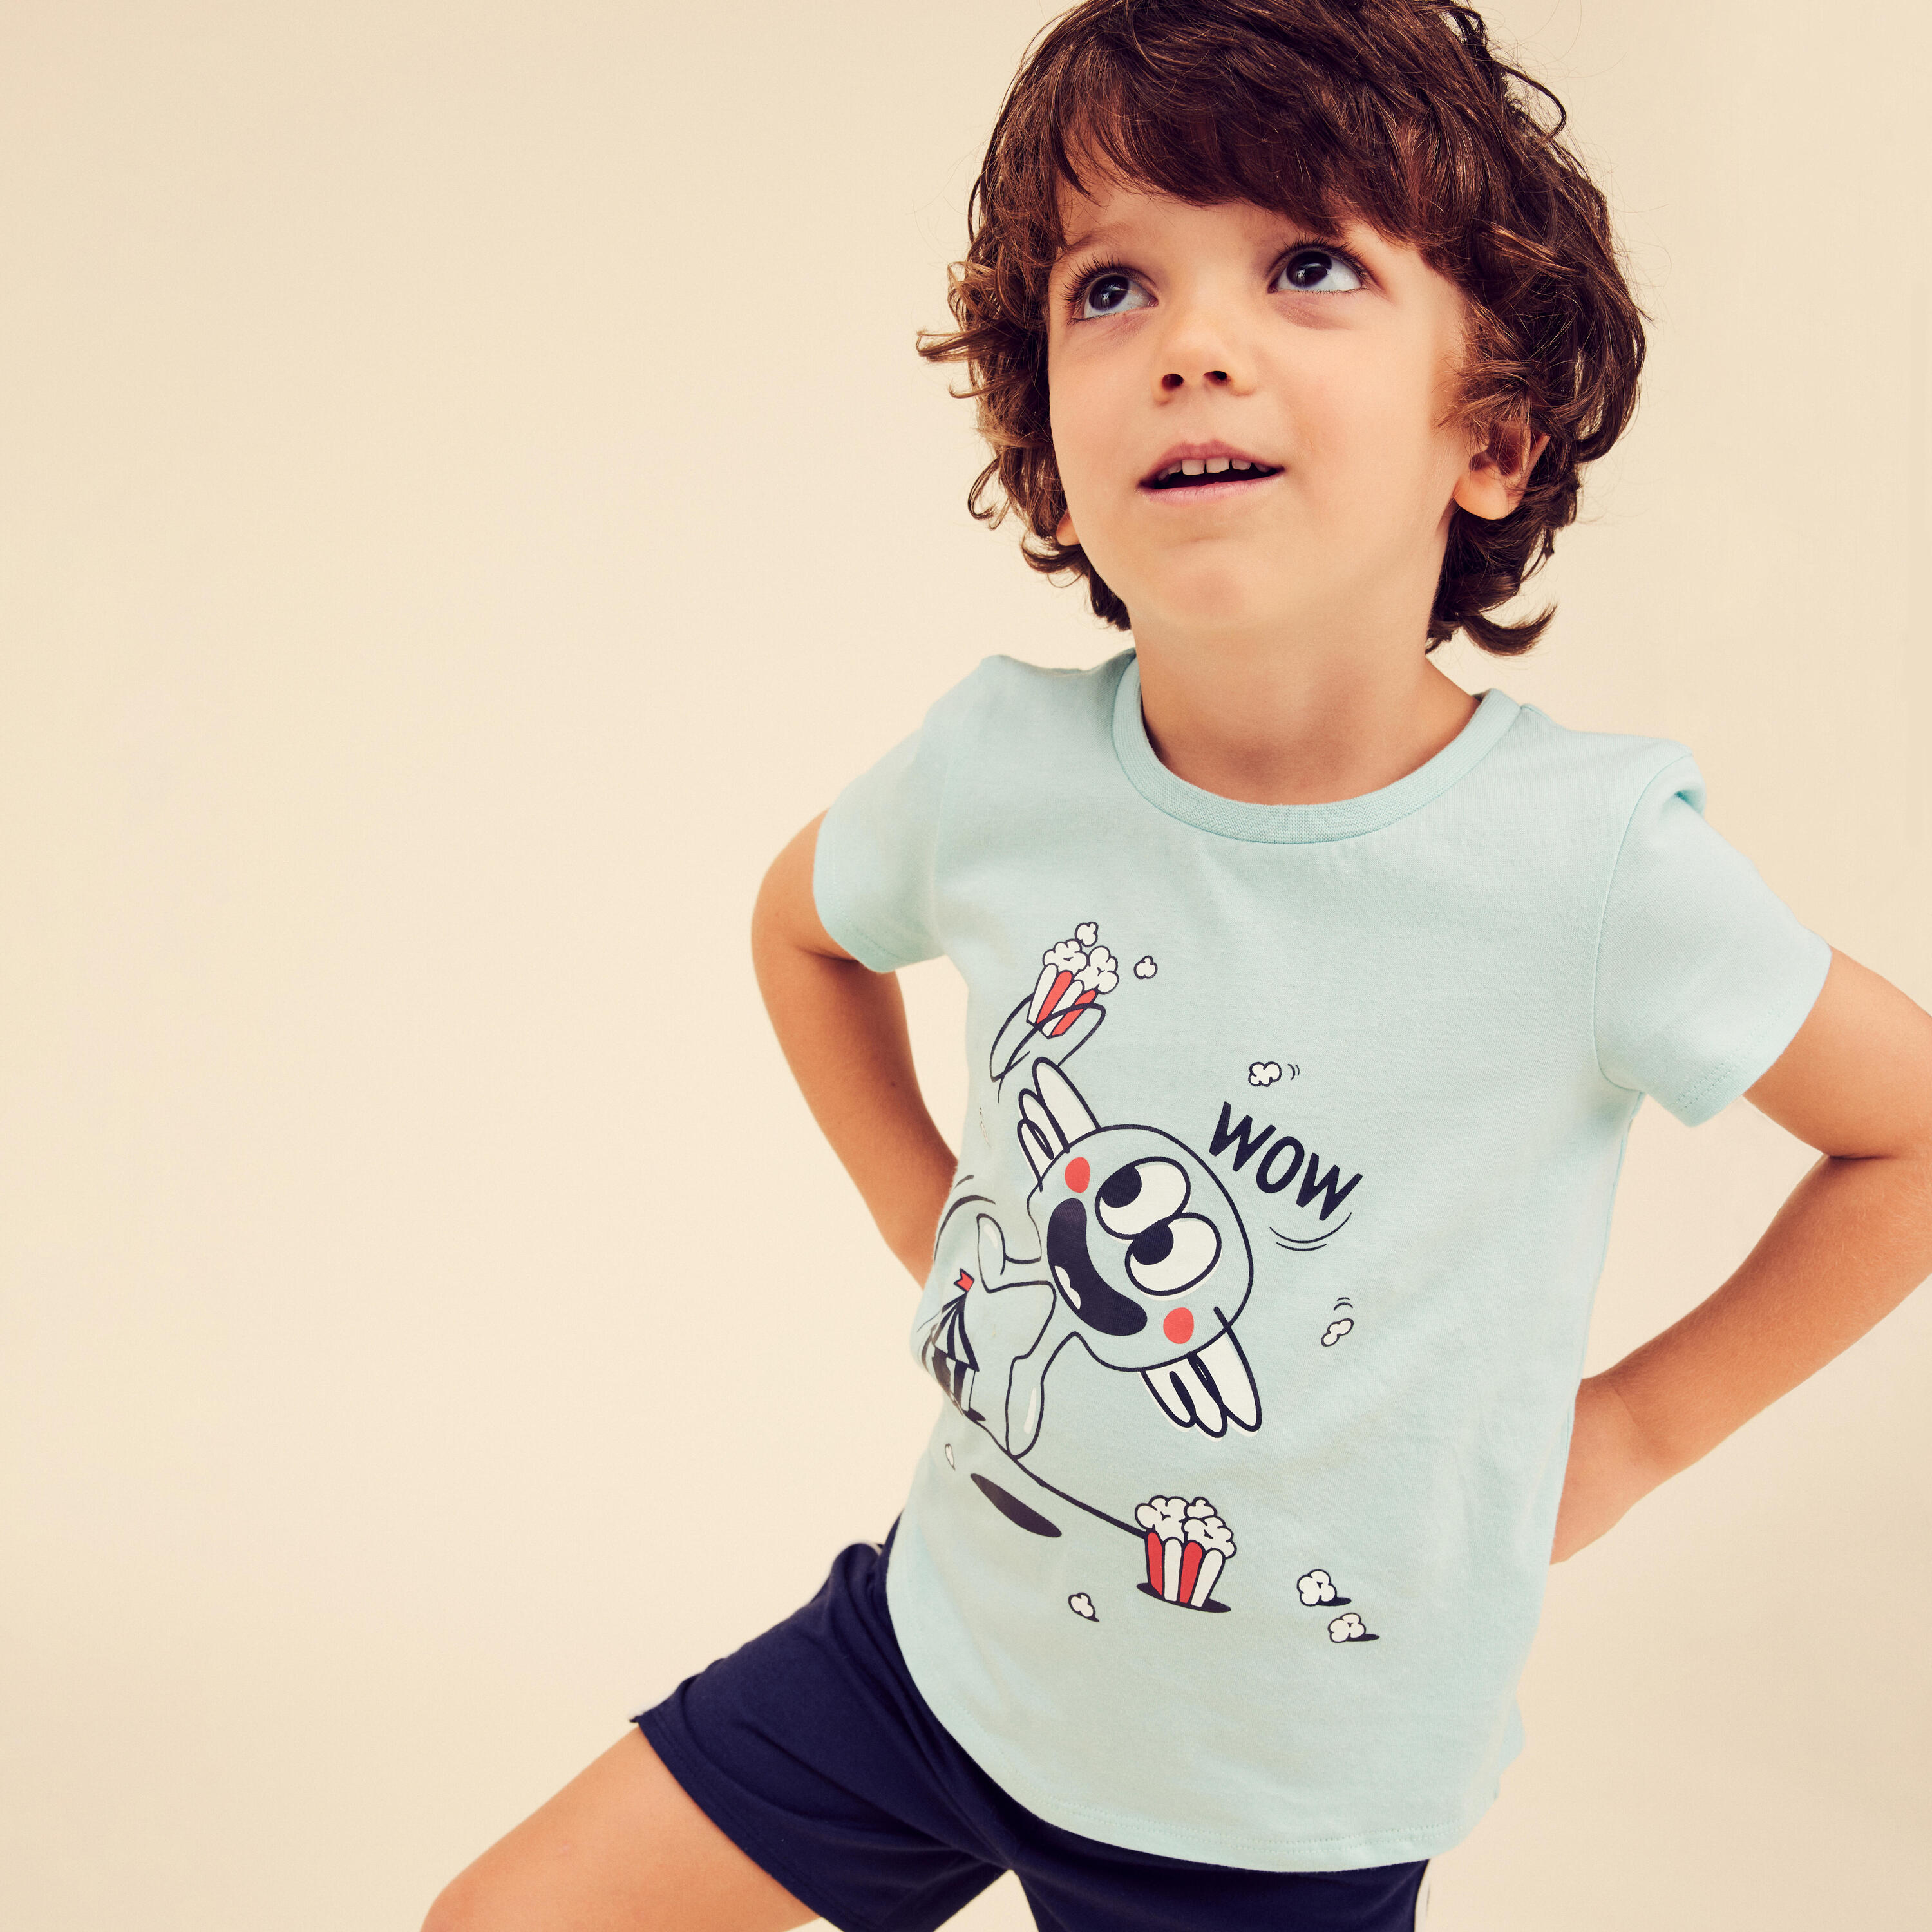 Kids' Cotton T-Shirt Basic - Turquoise with Print 8/10